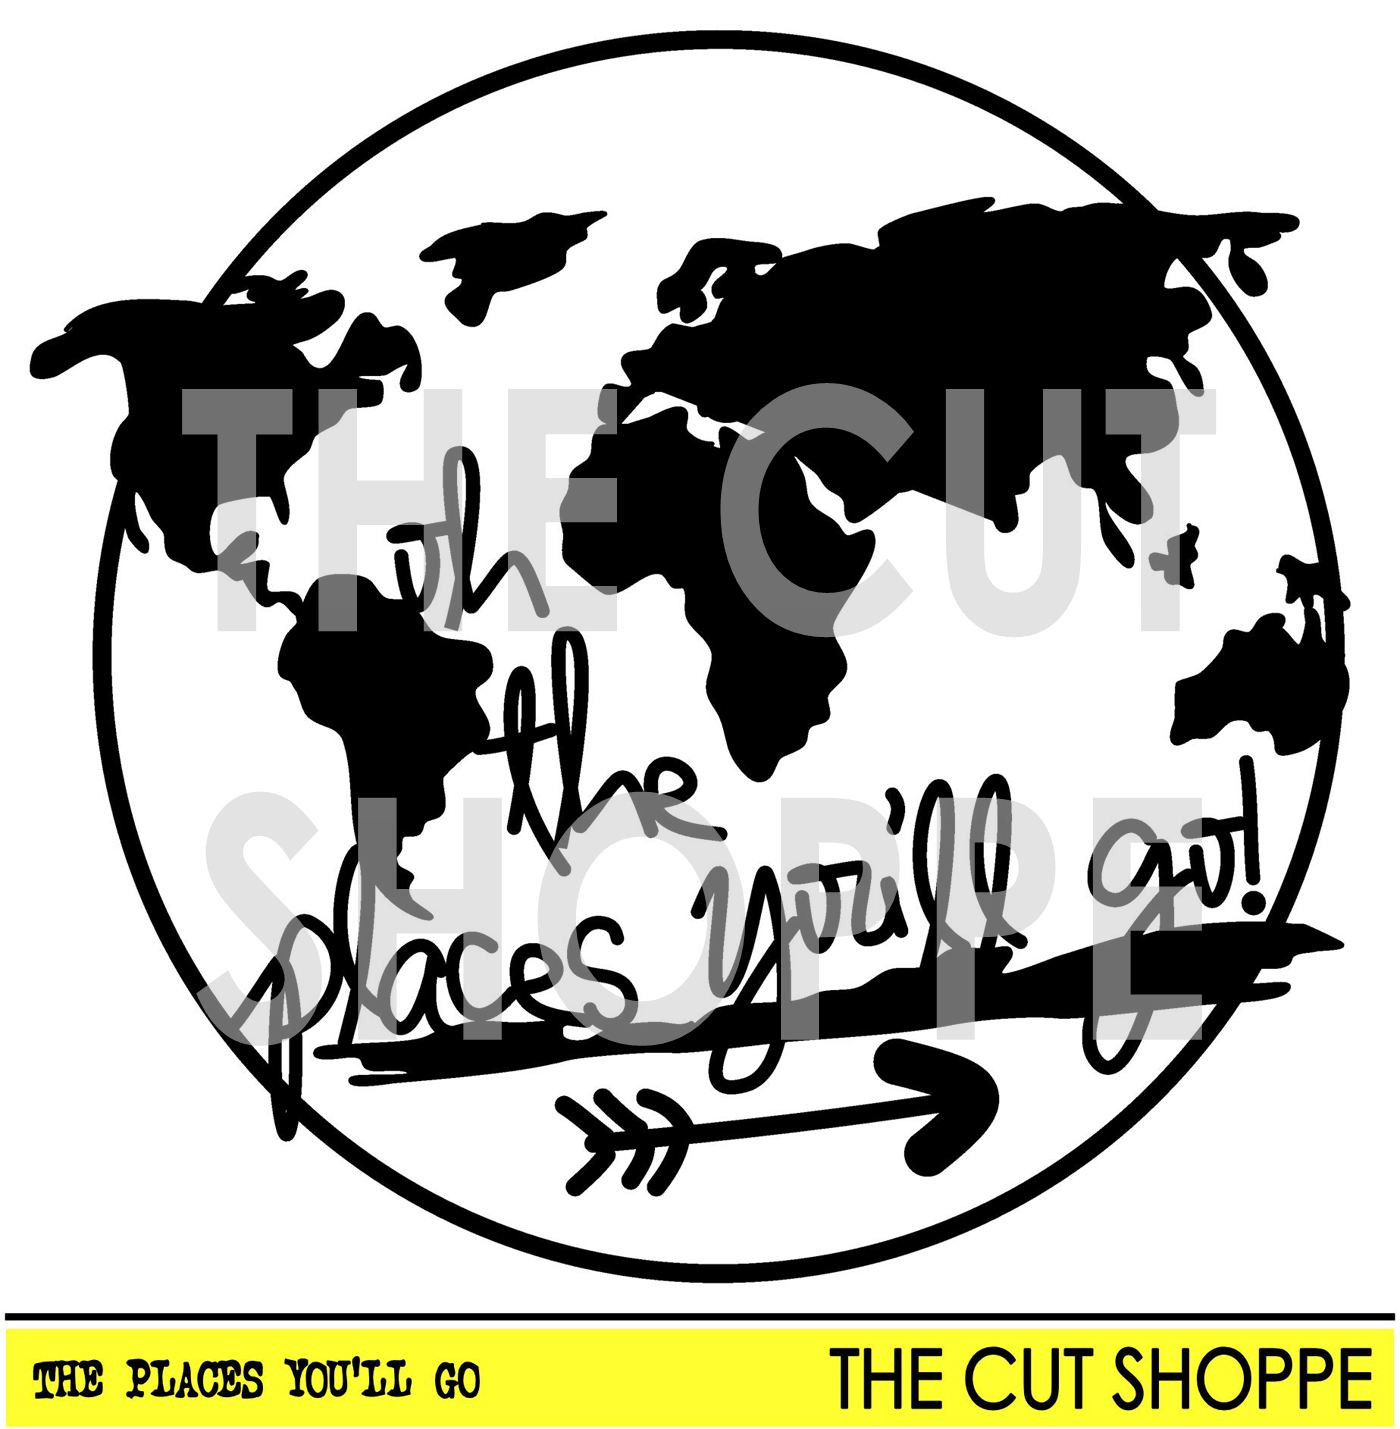 https://www.etsy.com/listing/198248563/the-places-youll-go-cut-file-is-a-world?ref=shop_home_active_2